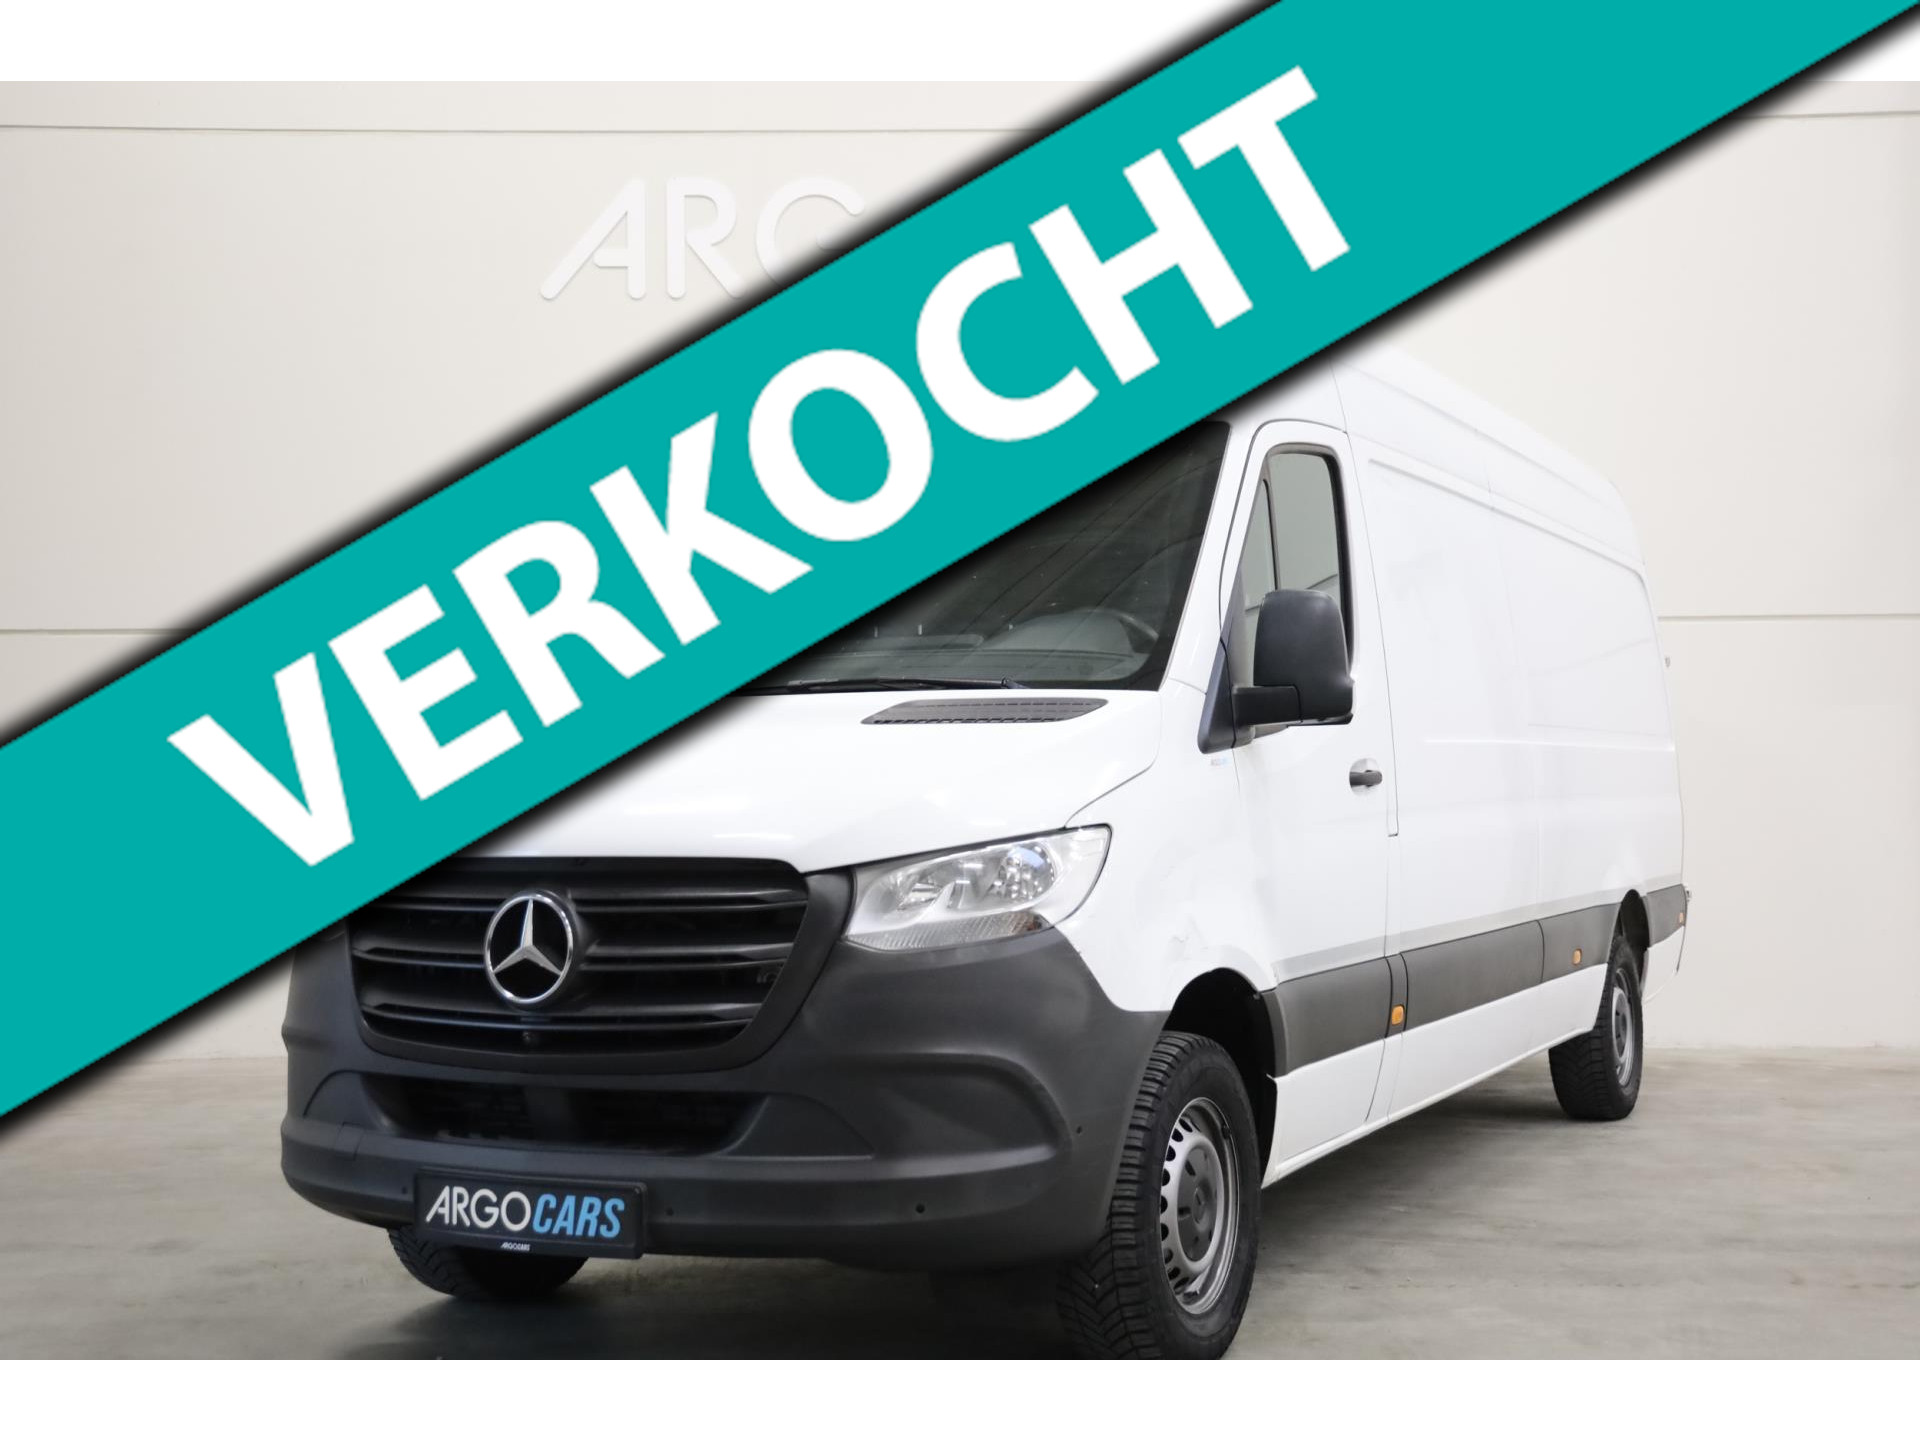 Mercedes-Benz Sprinter 316 CDI AUTOMAAT L3/H2 MBUX 360° CAMERA NAVI CLIMA/AIRCO PDC VOOR+ACHTER LEASE V/A €188P.M.  Bestelauto